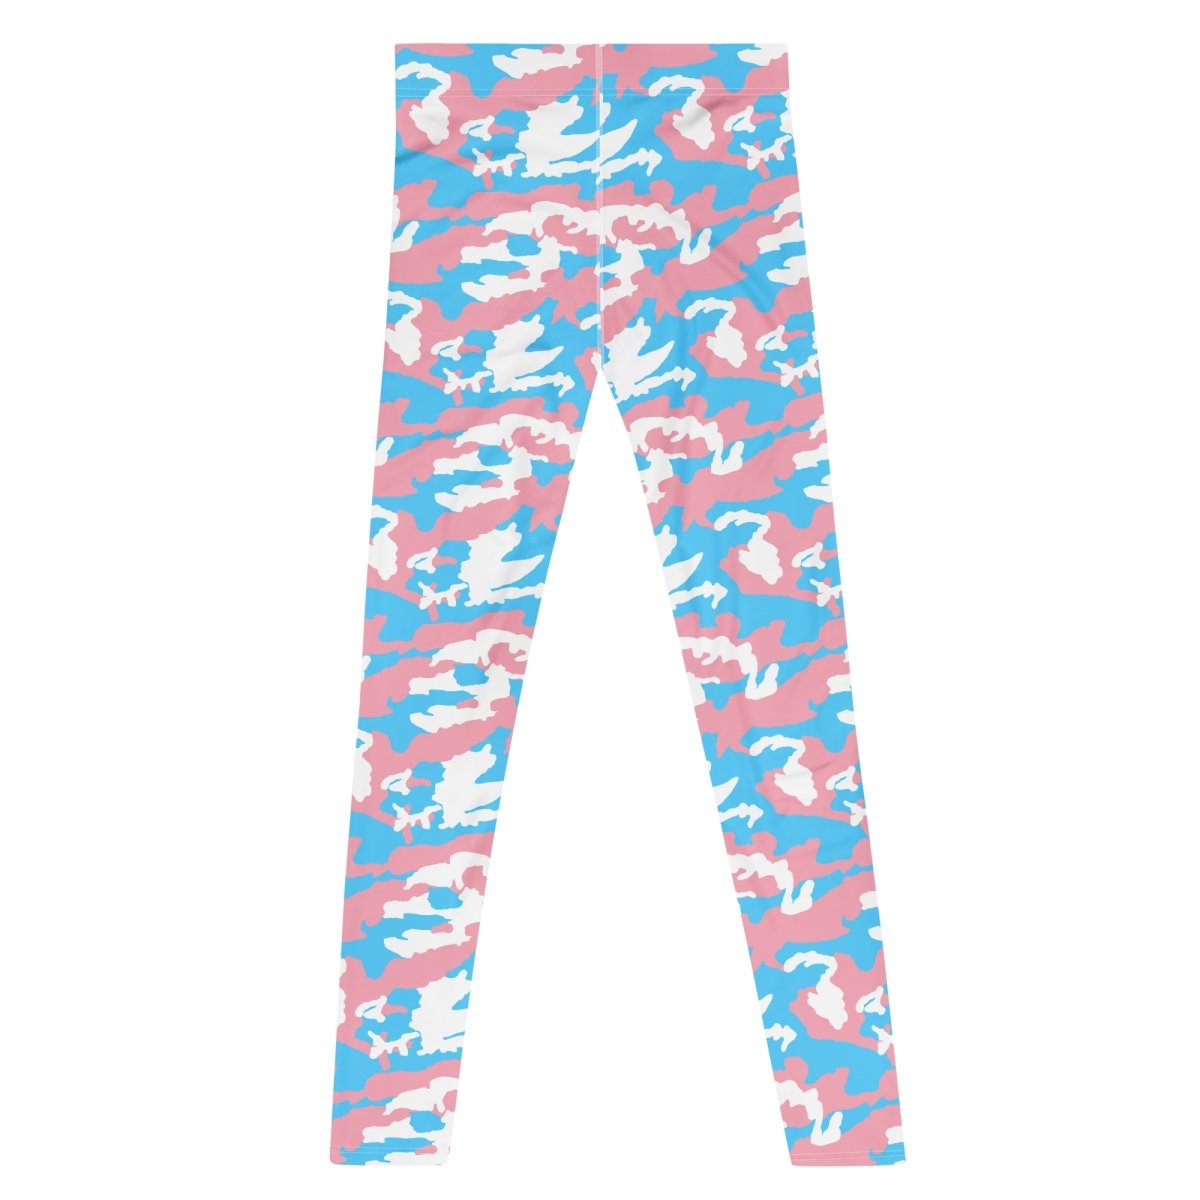 Pansexual Camouflage Leggings - On Trend Shirts – On Trend Shirts